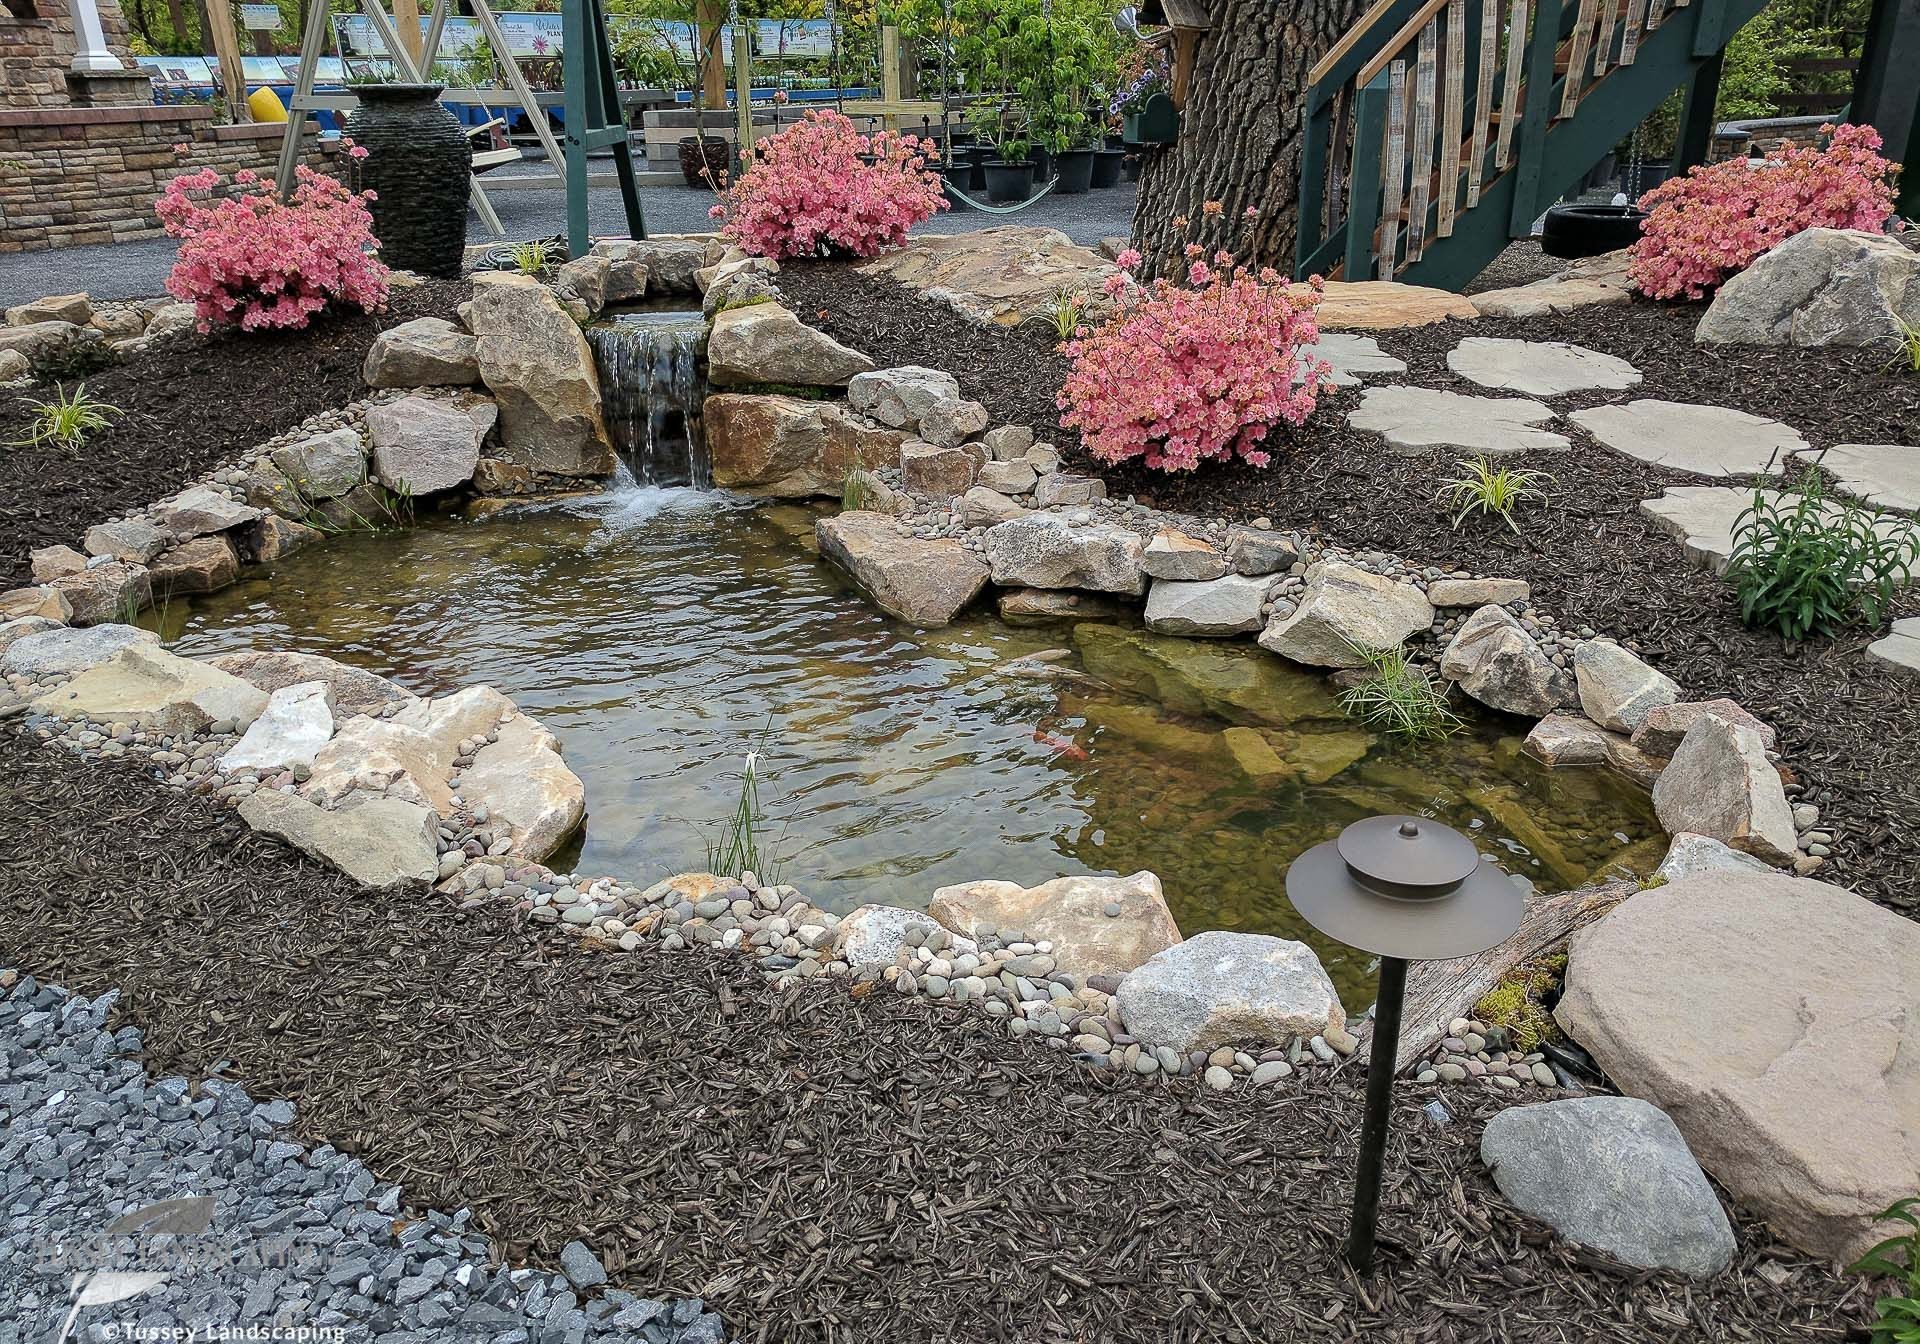 A small pond with rocks and flowers.